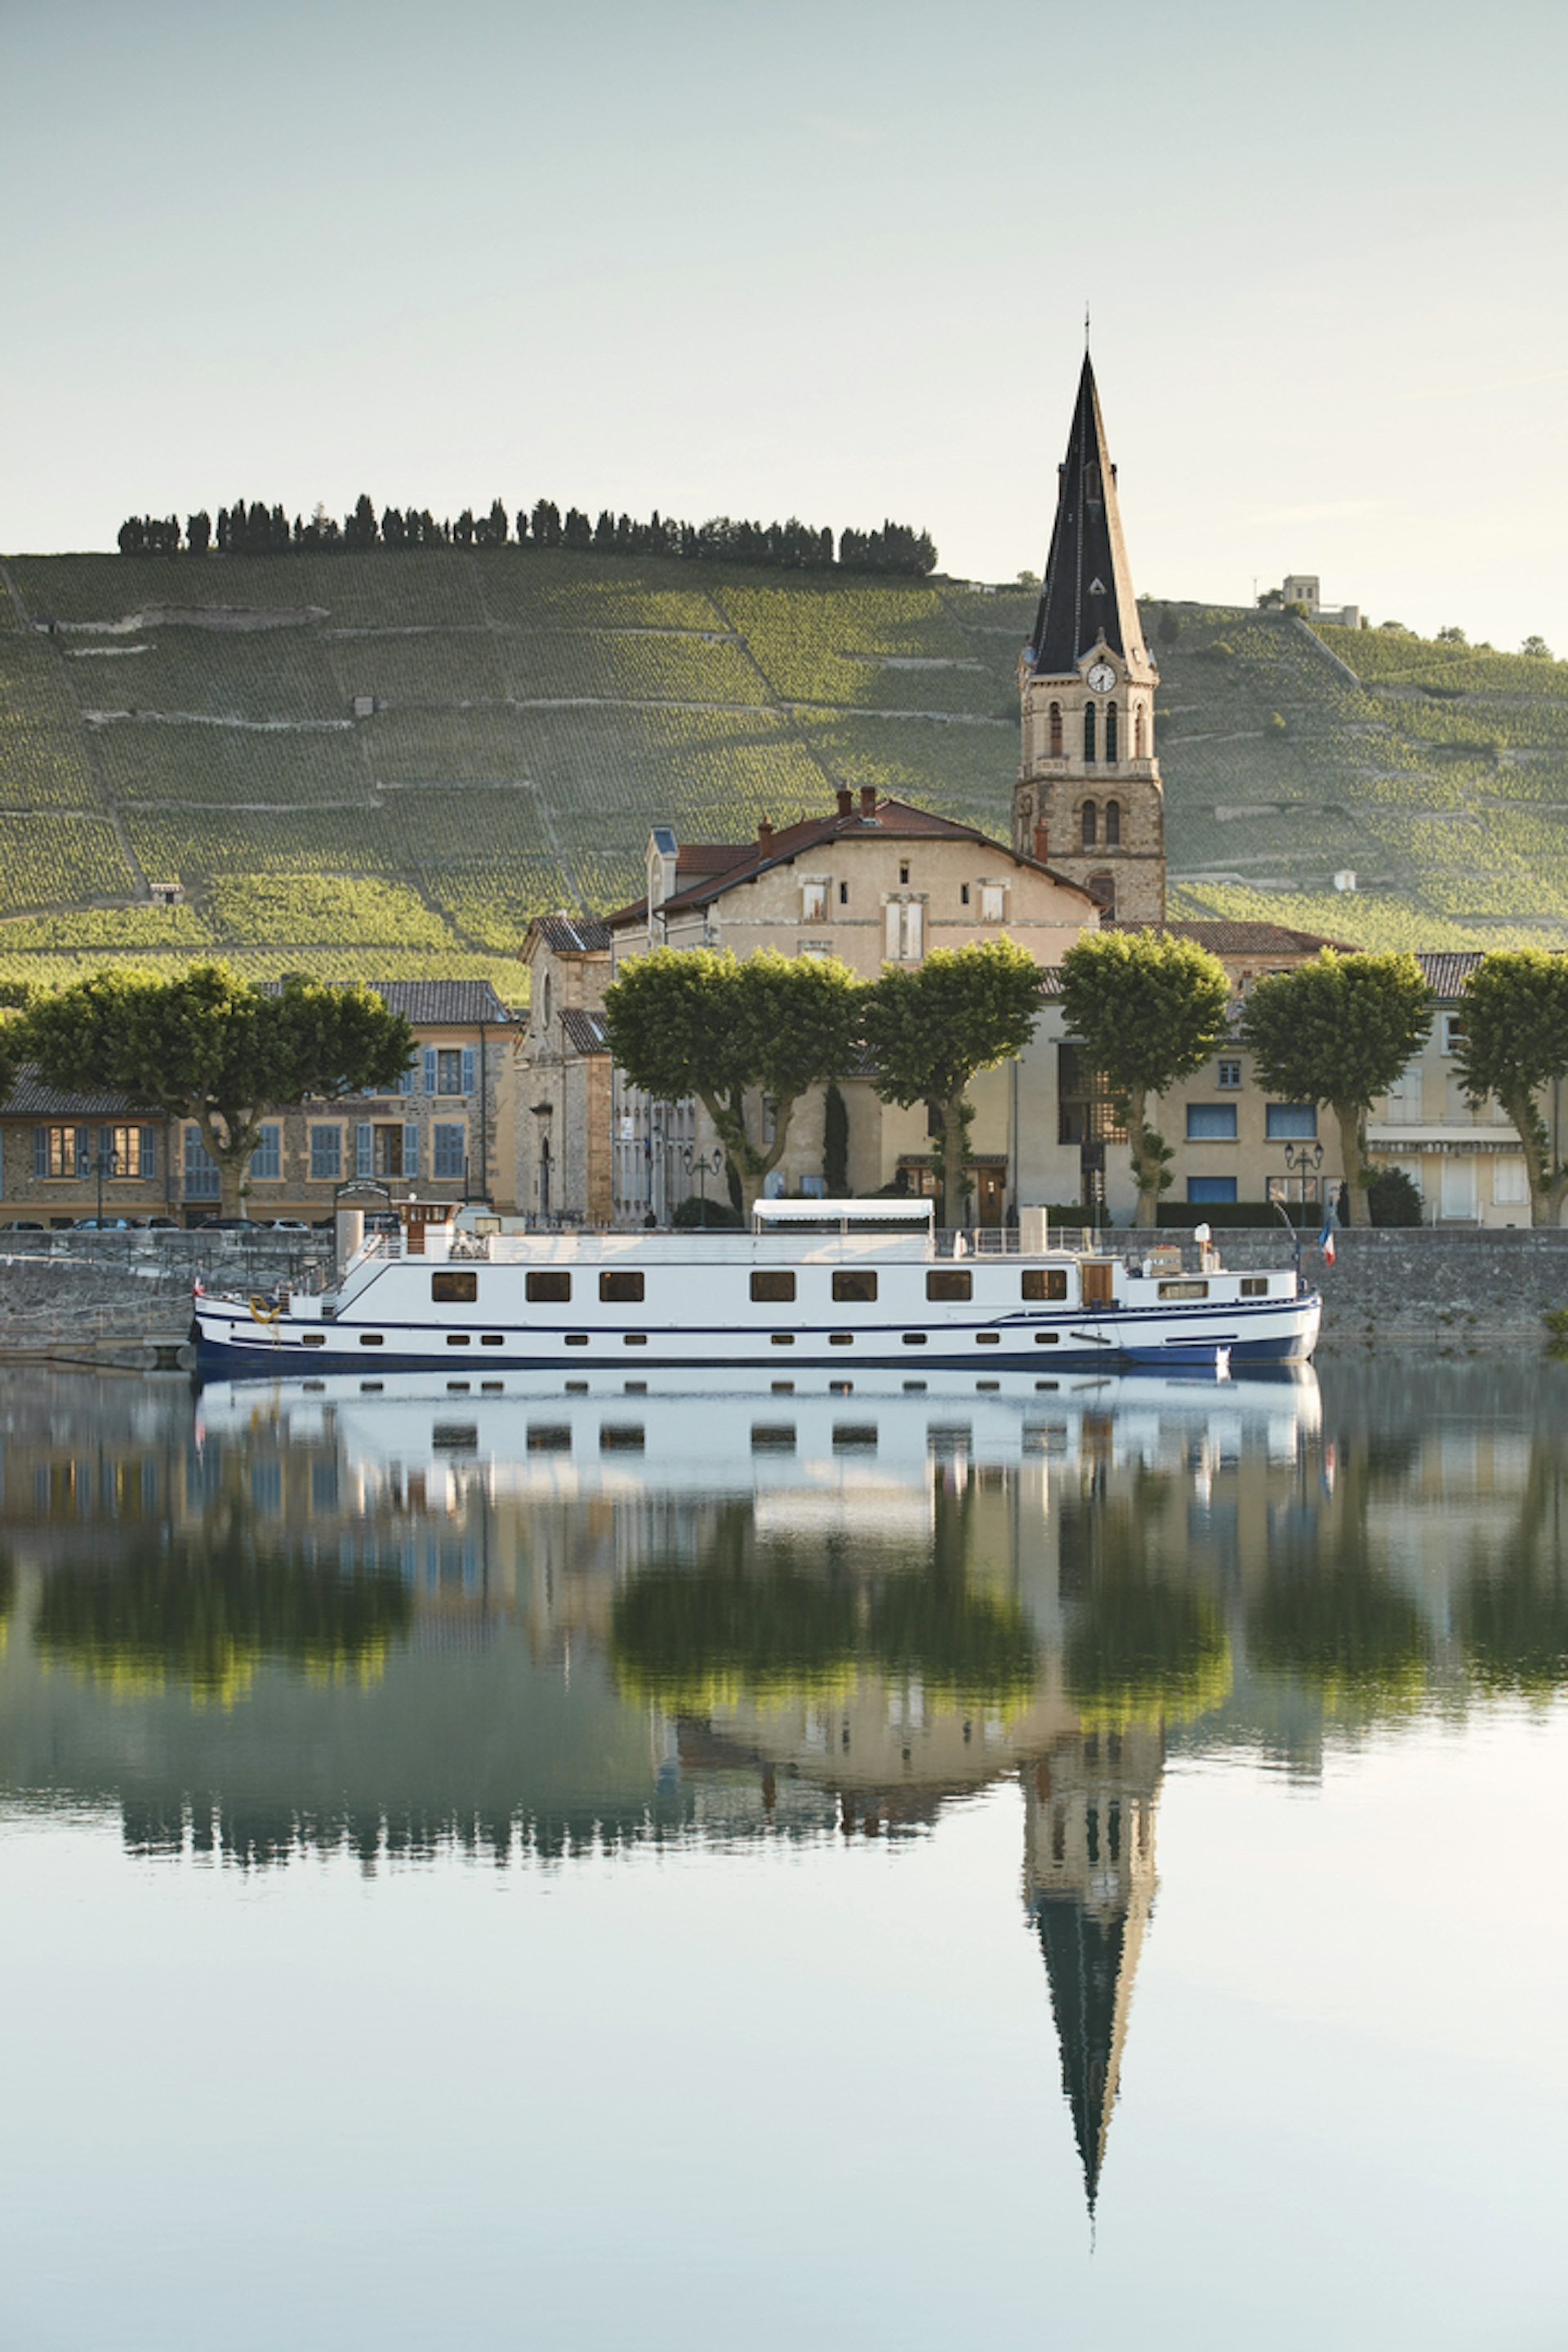 A small river cruise boat sails through a scenic French village